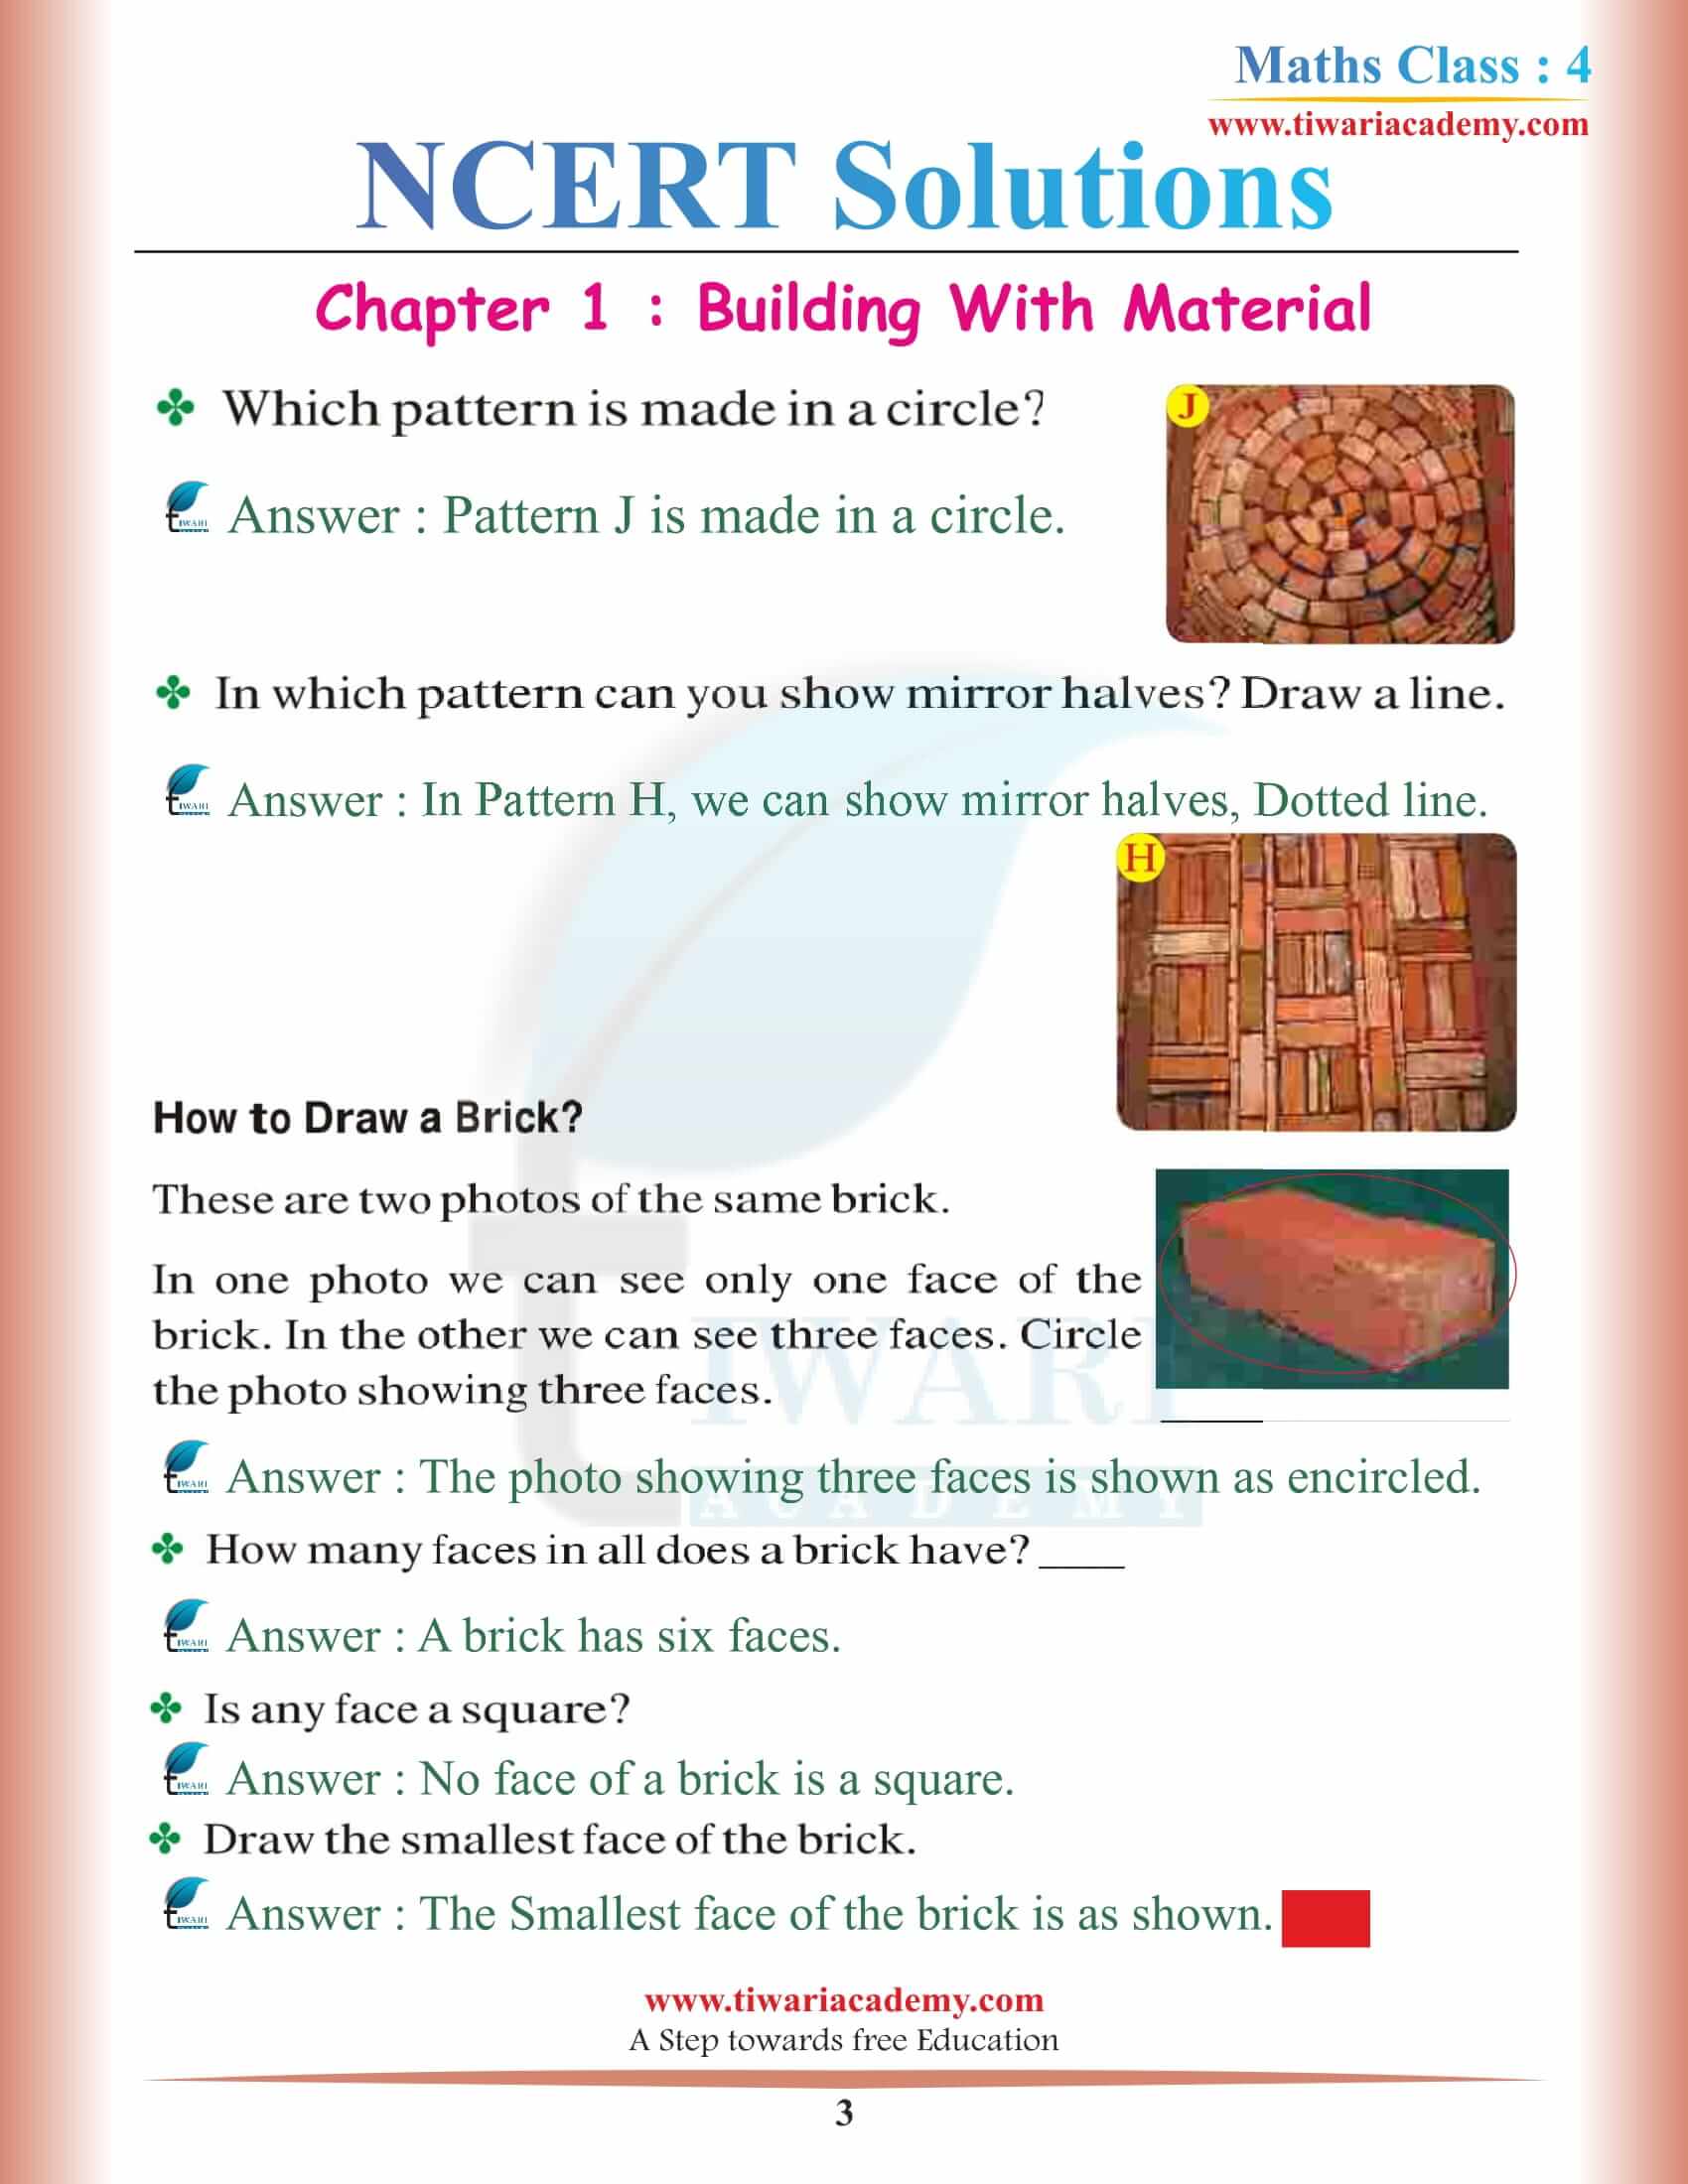 NCERT Solutions for Class 4 Maths Chapter 1 in PDF